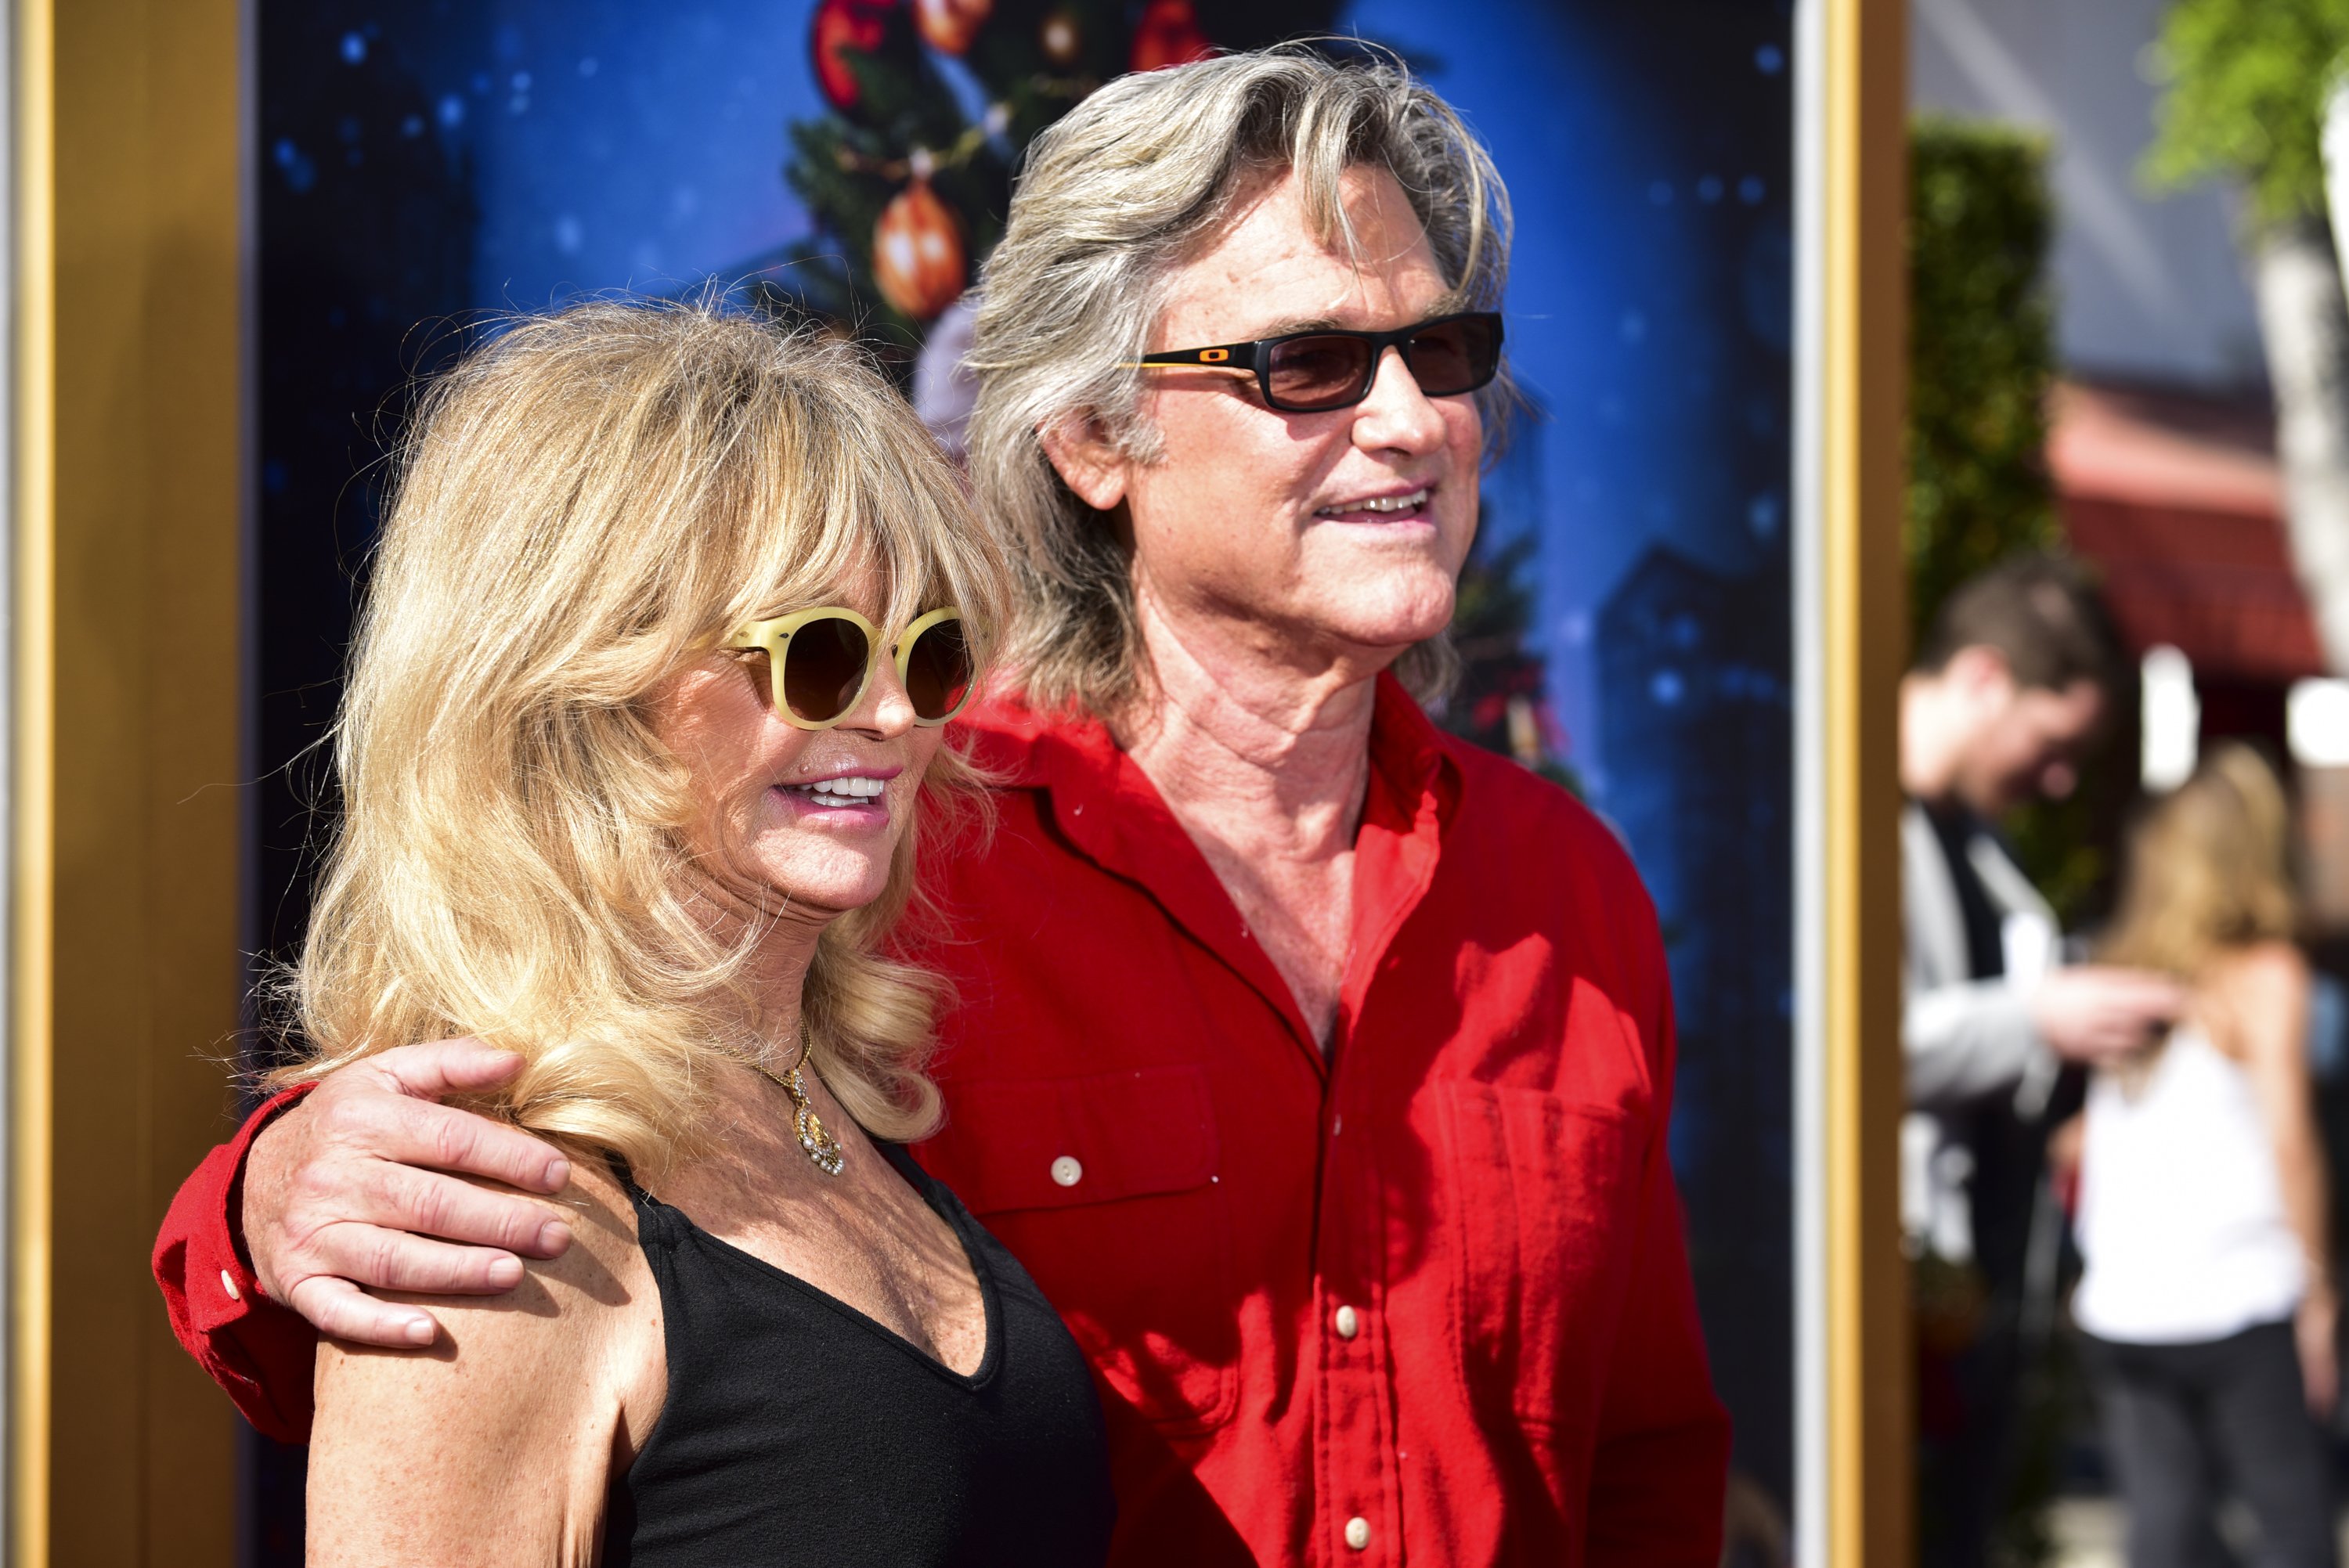 Goldie Hawn and Kurt Russell attend the premiere of "The Christmas Chronicles" in Los Angeles, California on November 18, 2018 | Photo: Getty Images